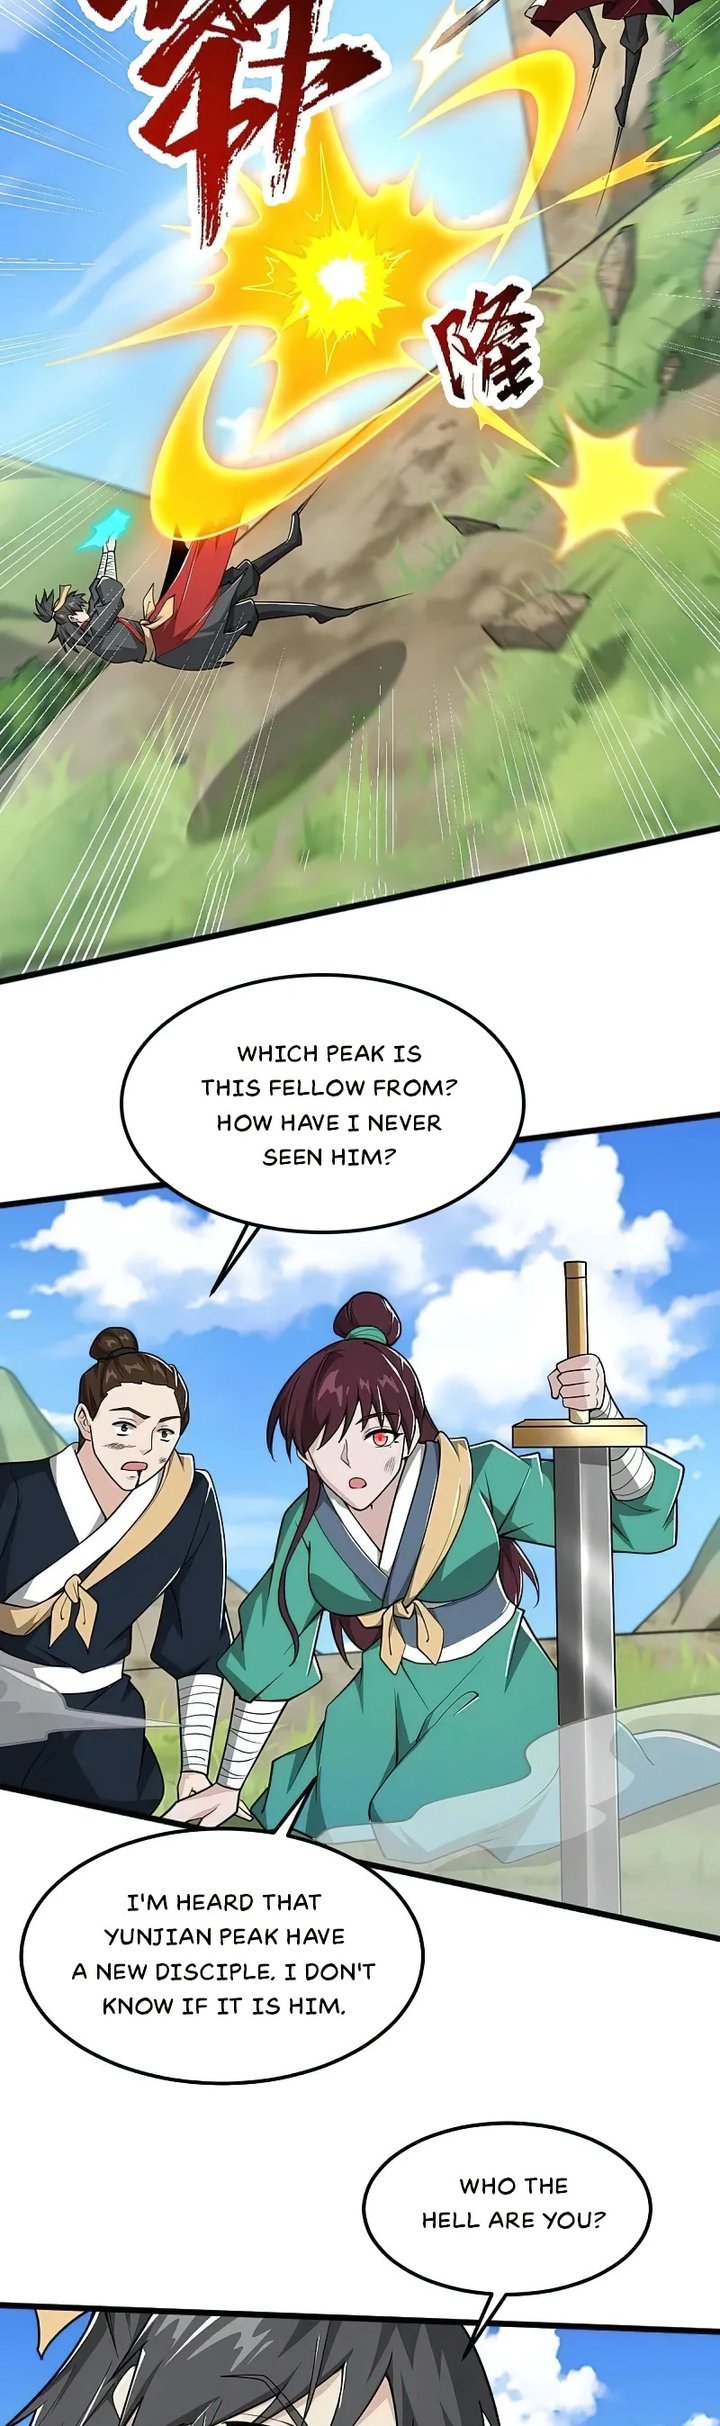 One Sword Reigns Supreme Chapter 309 Page 11